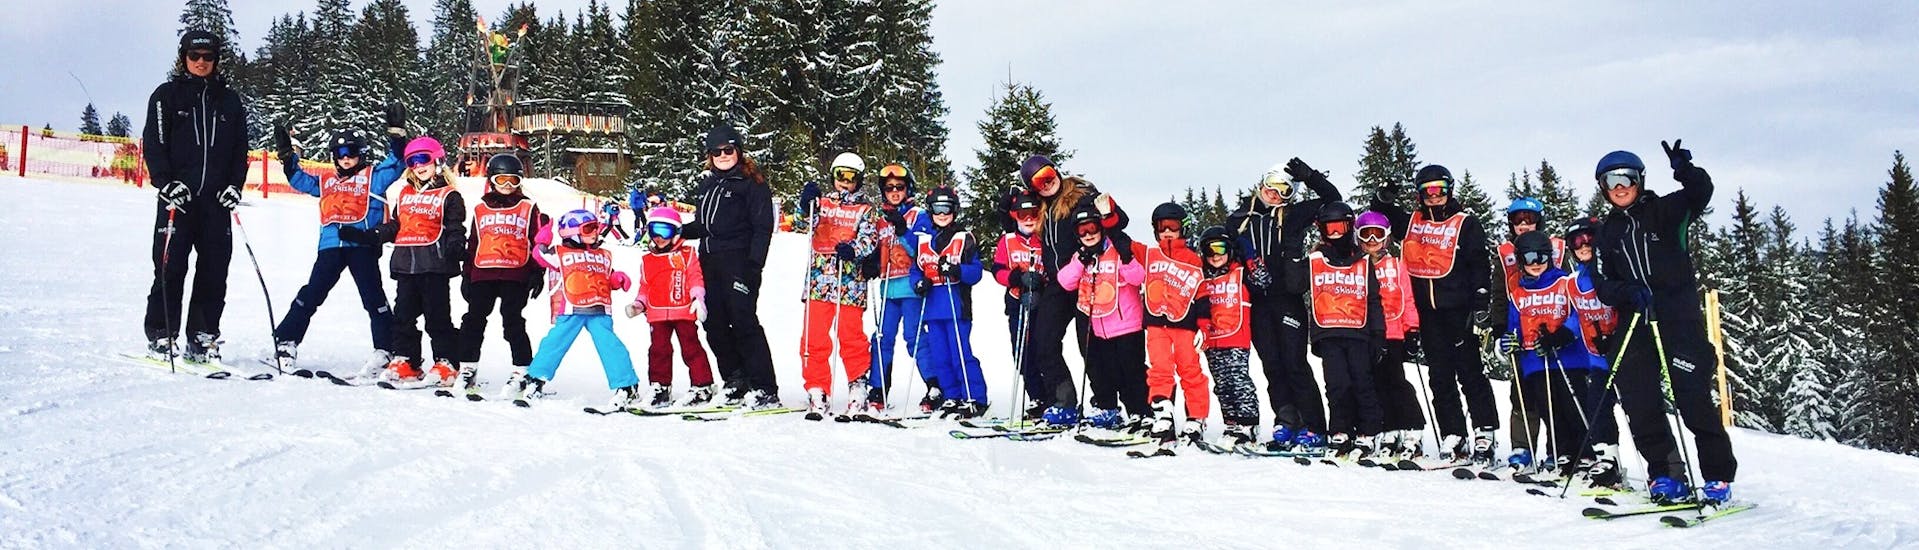 Kids Ski Lessons (6-14 y.) for All Levels.